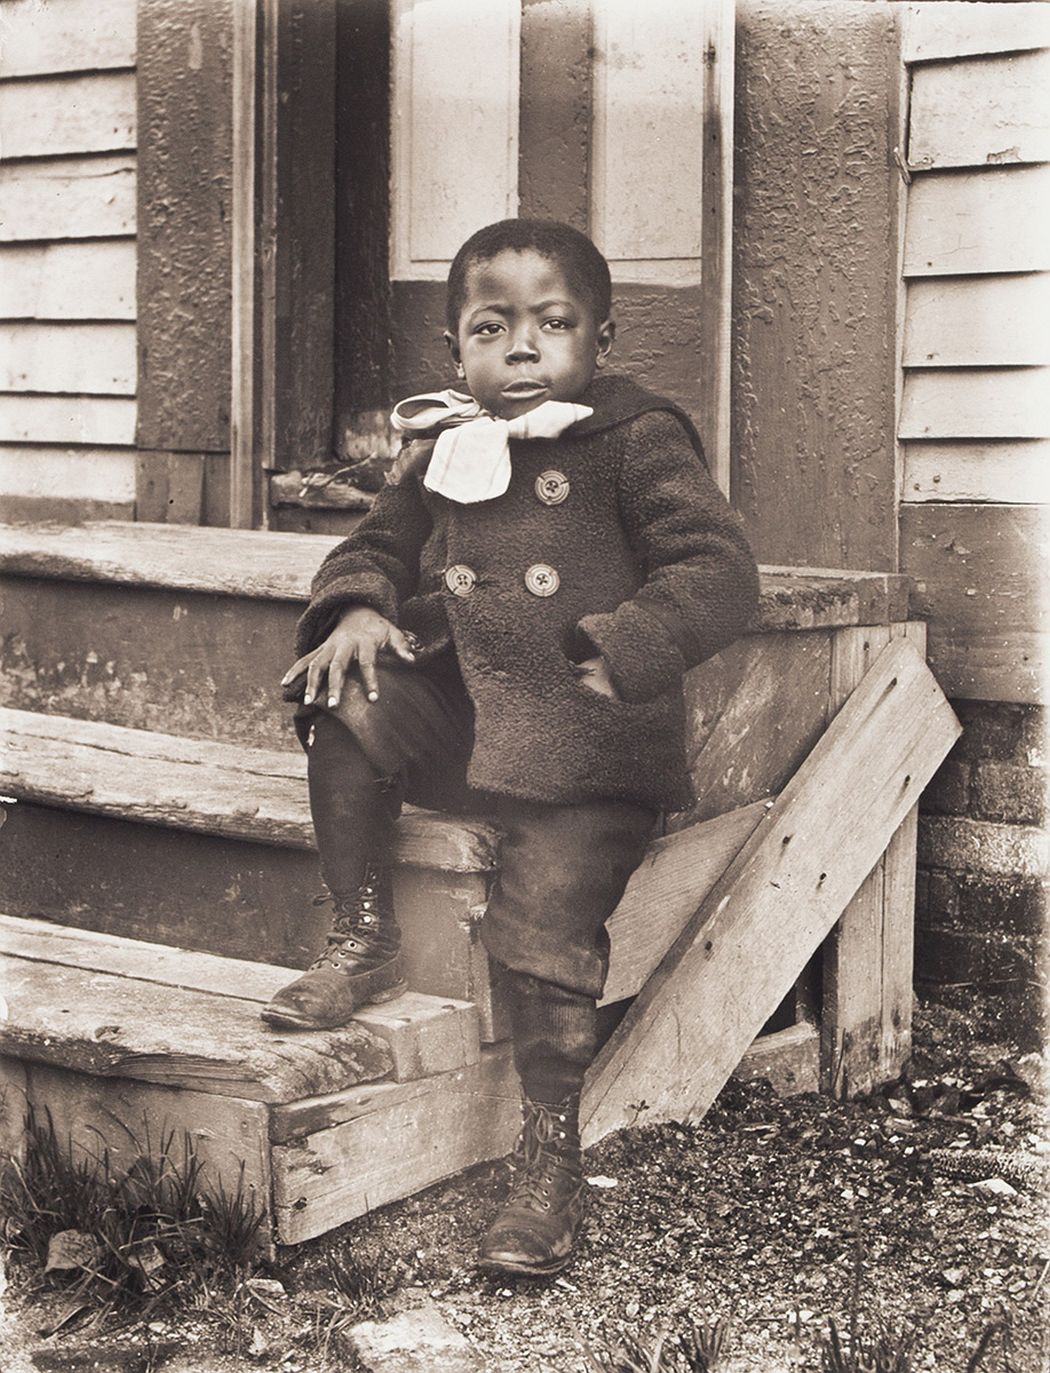 Portrait of Ralph Mendis on a Stoop, about 1902, printed 2016, archival inkjet print, E.132.16.8 Ralph Mendis was born in 1897 and is seen here at approximately age 5. His mother Francis was part of the New Bern, North Carolina, migration of blacks to Worcester, Massachusetts. His father was one of a handful of Jamaican immigrants who resided in the city. Rhode Island records from 1906 indicate that Ralph died as a child, though the cause is unknown.